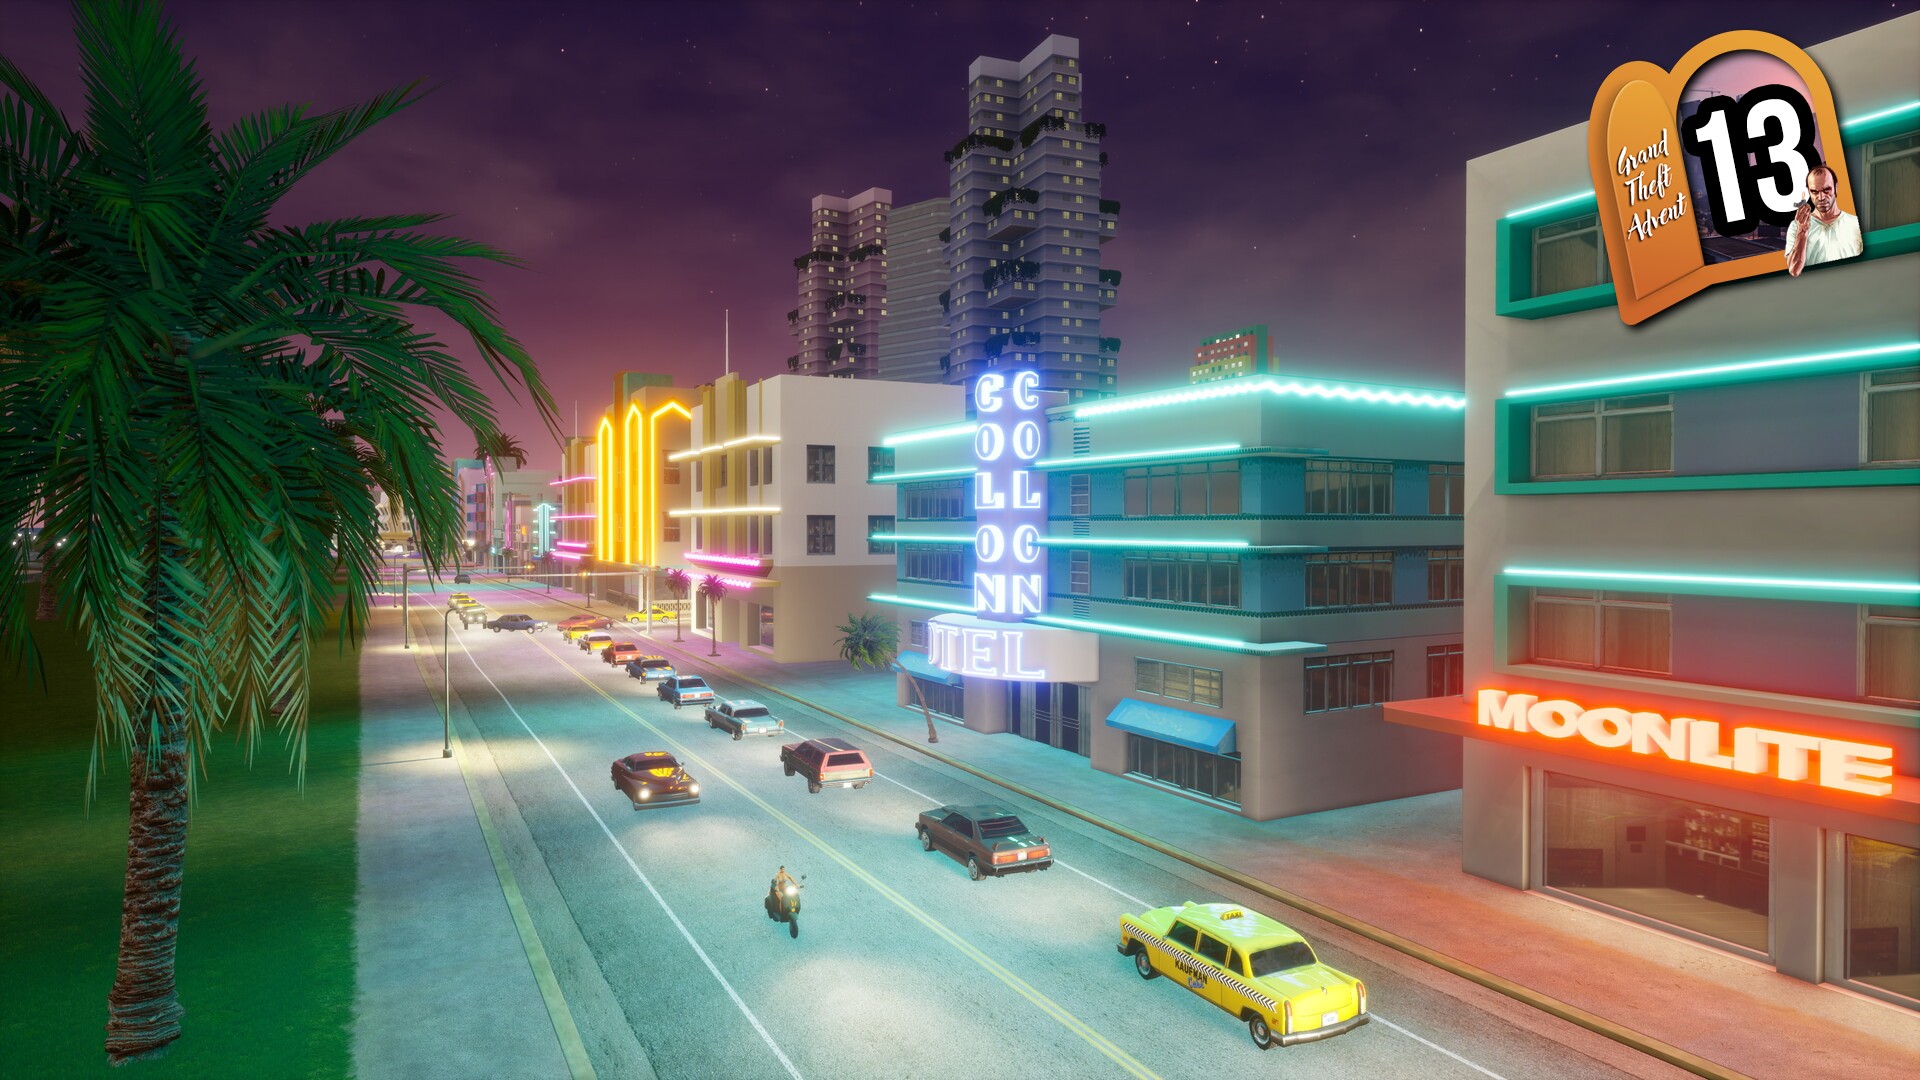 The first trailer for Grand Theft Auto VI has landed and we're back in Vice  City